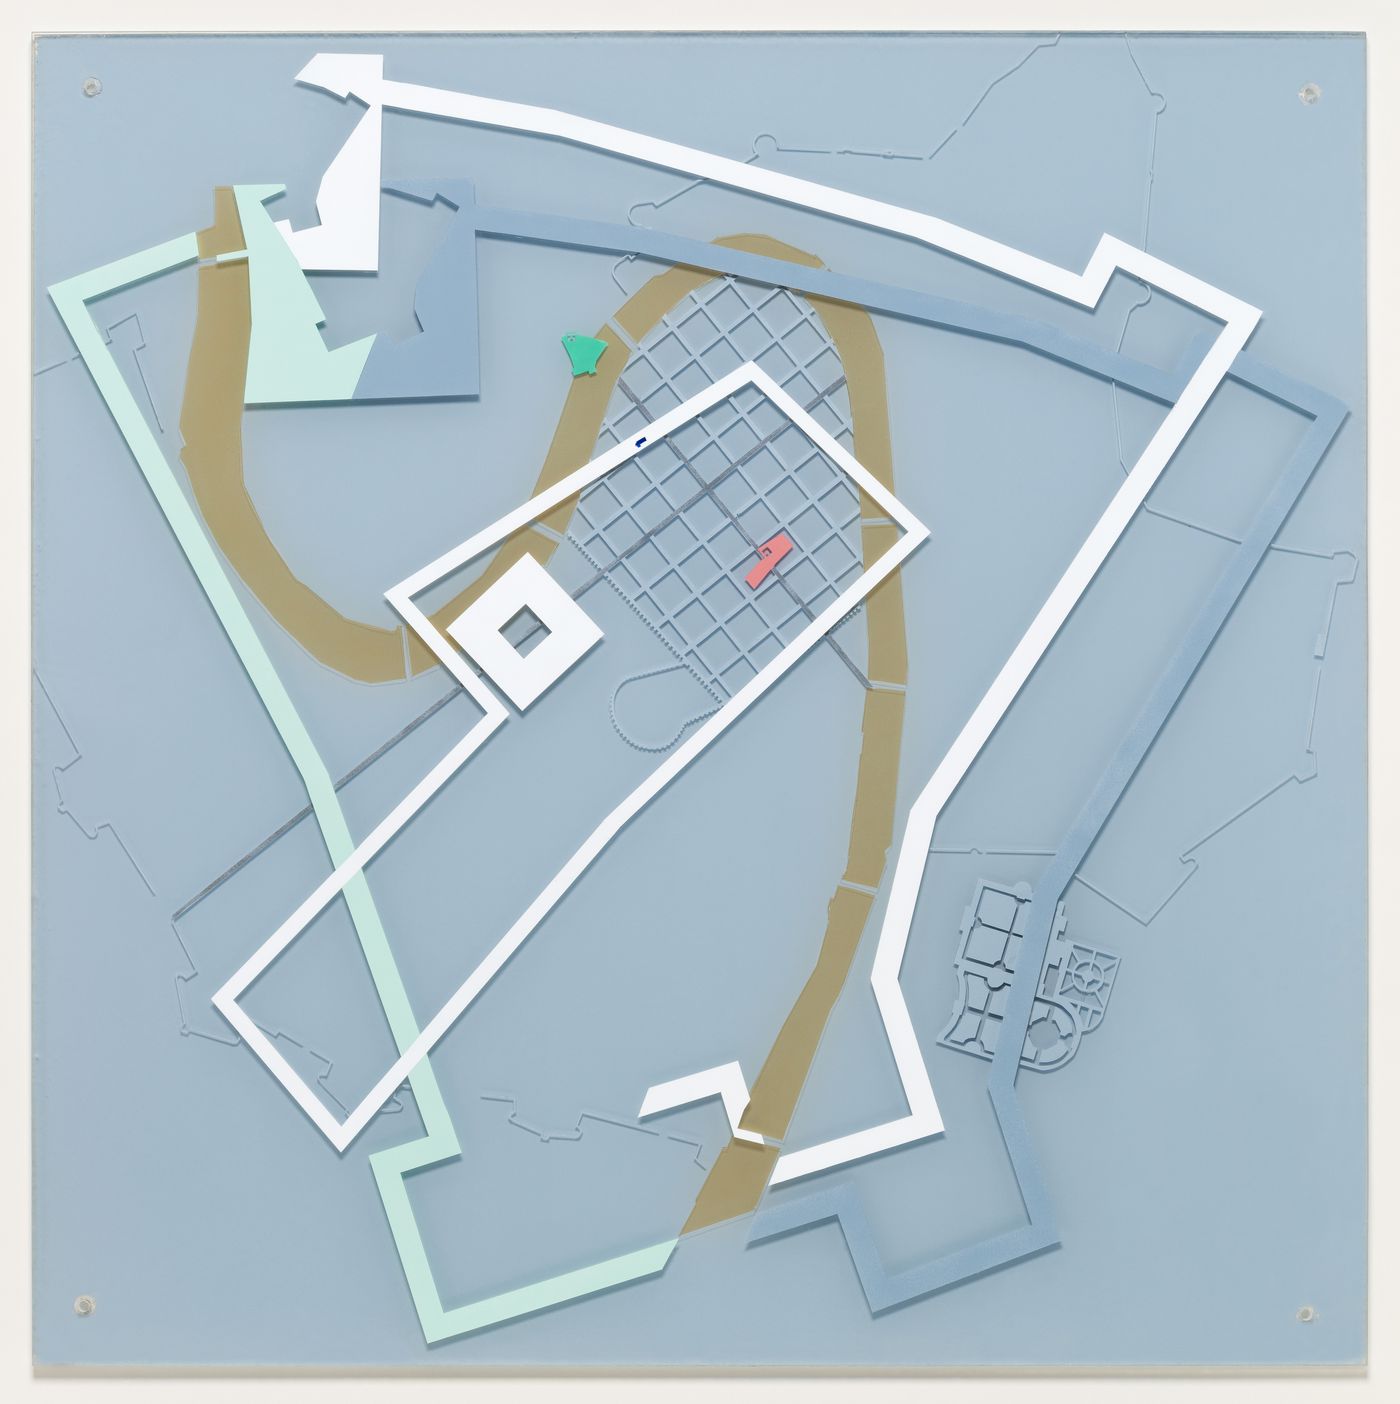 Site plan for "Moving Arrows, Eros, and Other Errors"